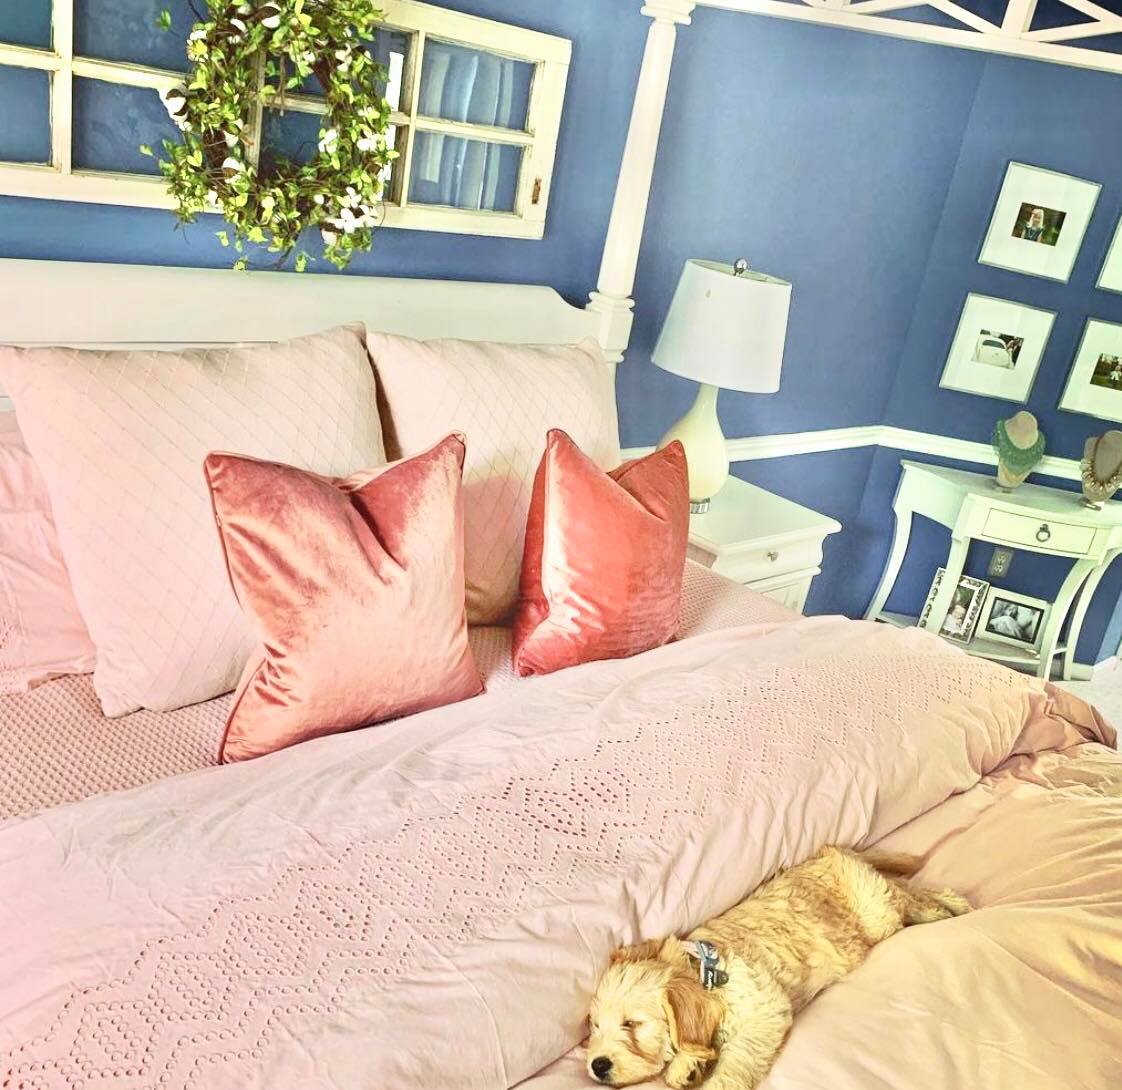 clean bed with pink comforter and pillows